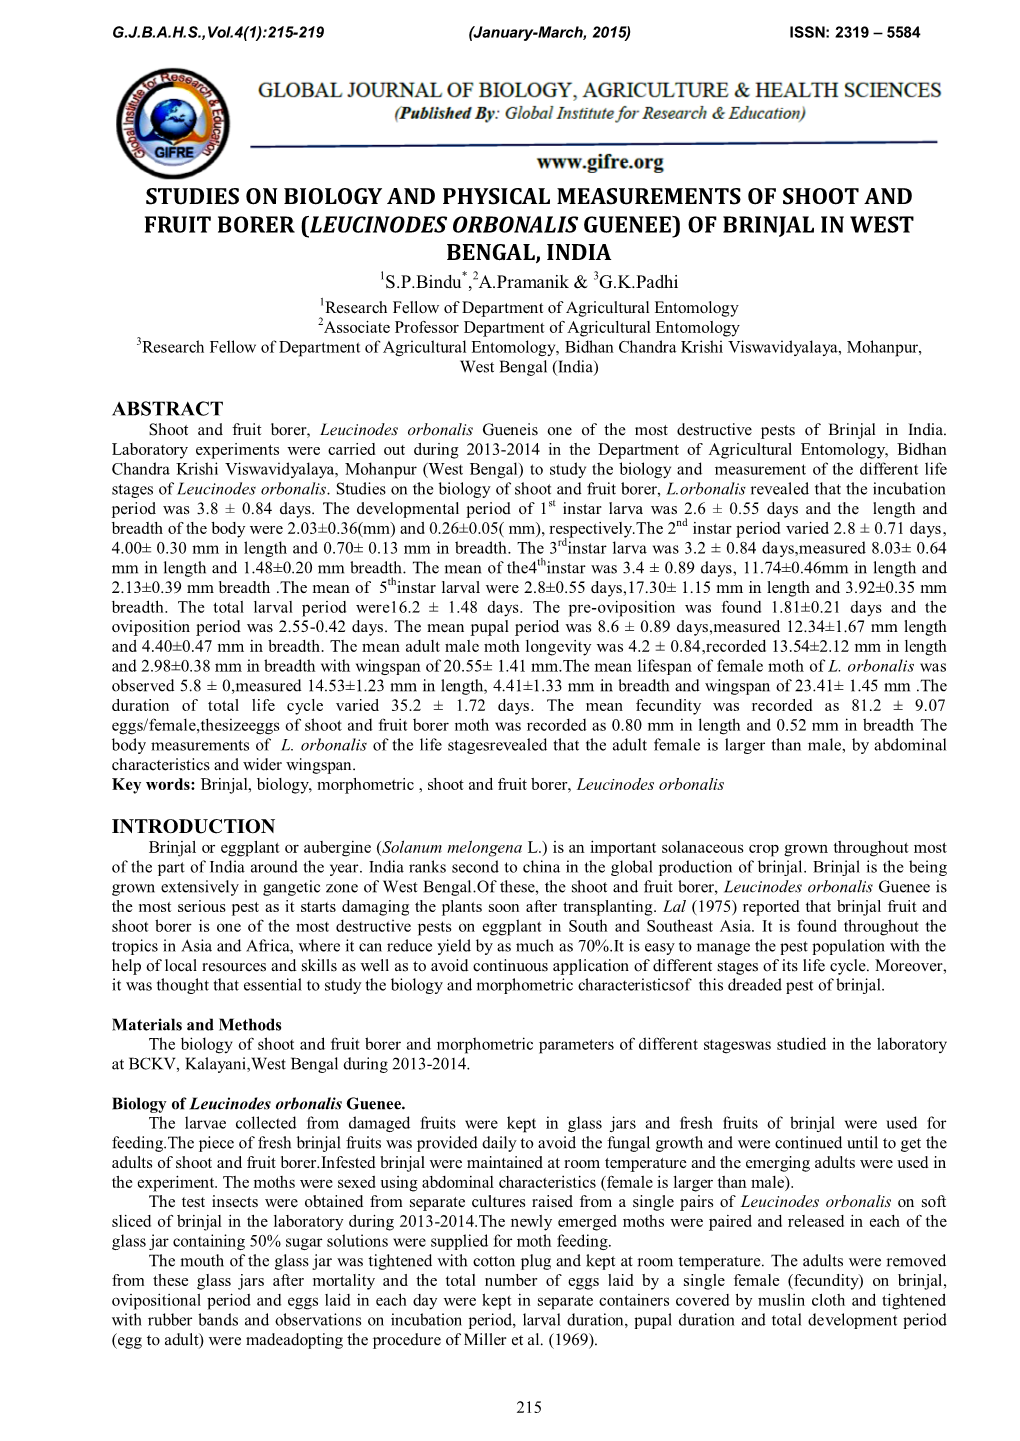 Studies on Biology and Physical Measurements of Shoot and Fruit Borer (Leucinodes Orbonalis Guenee) of Brinjal in West Bengal, I